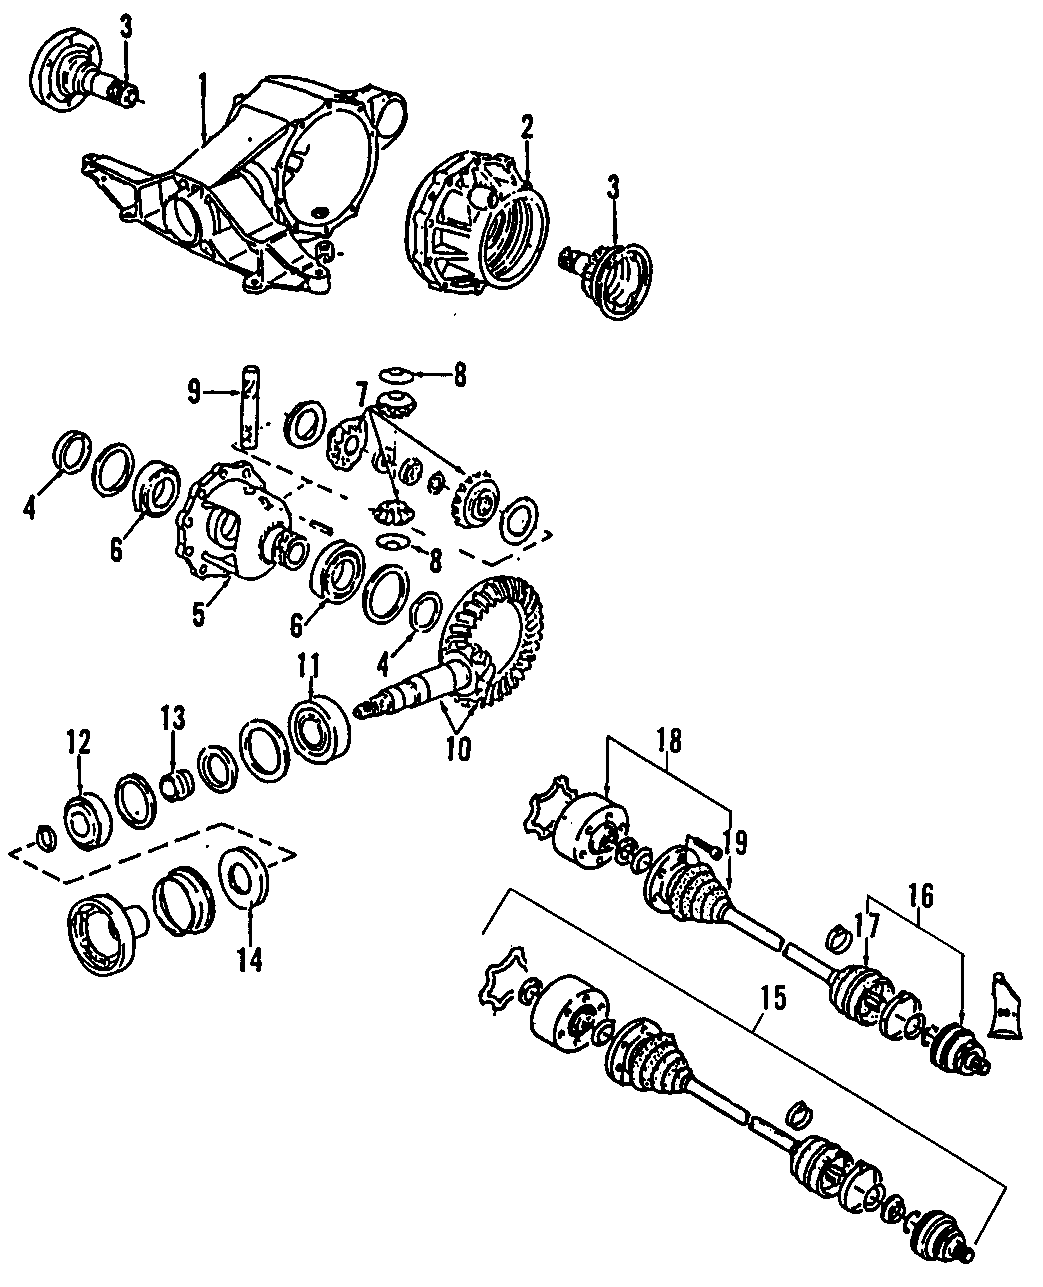 6DRIVE AXLES. REAR AXLE. AXLE SHAFTS & JOINTS. DIFFERENTIAL. PROPELLER SHAFT.https://images.simplepart.com/images/parts/motor/fullsize/F207090.png